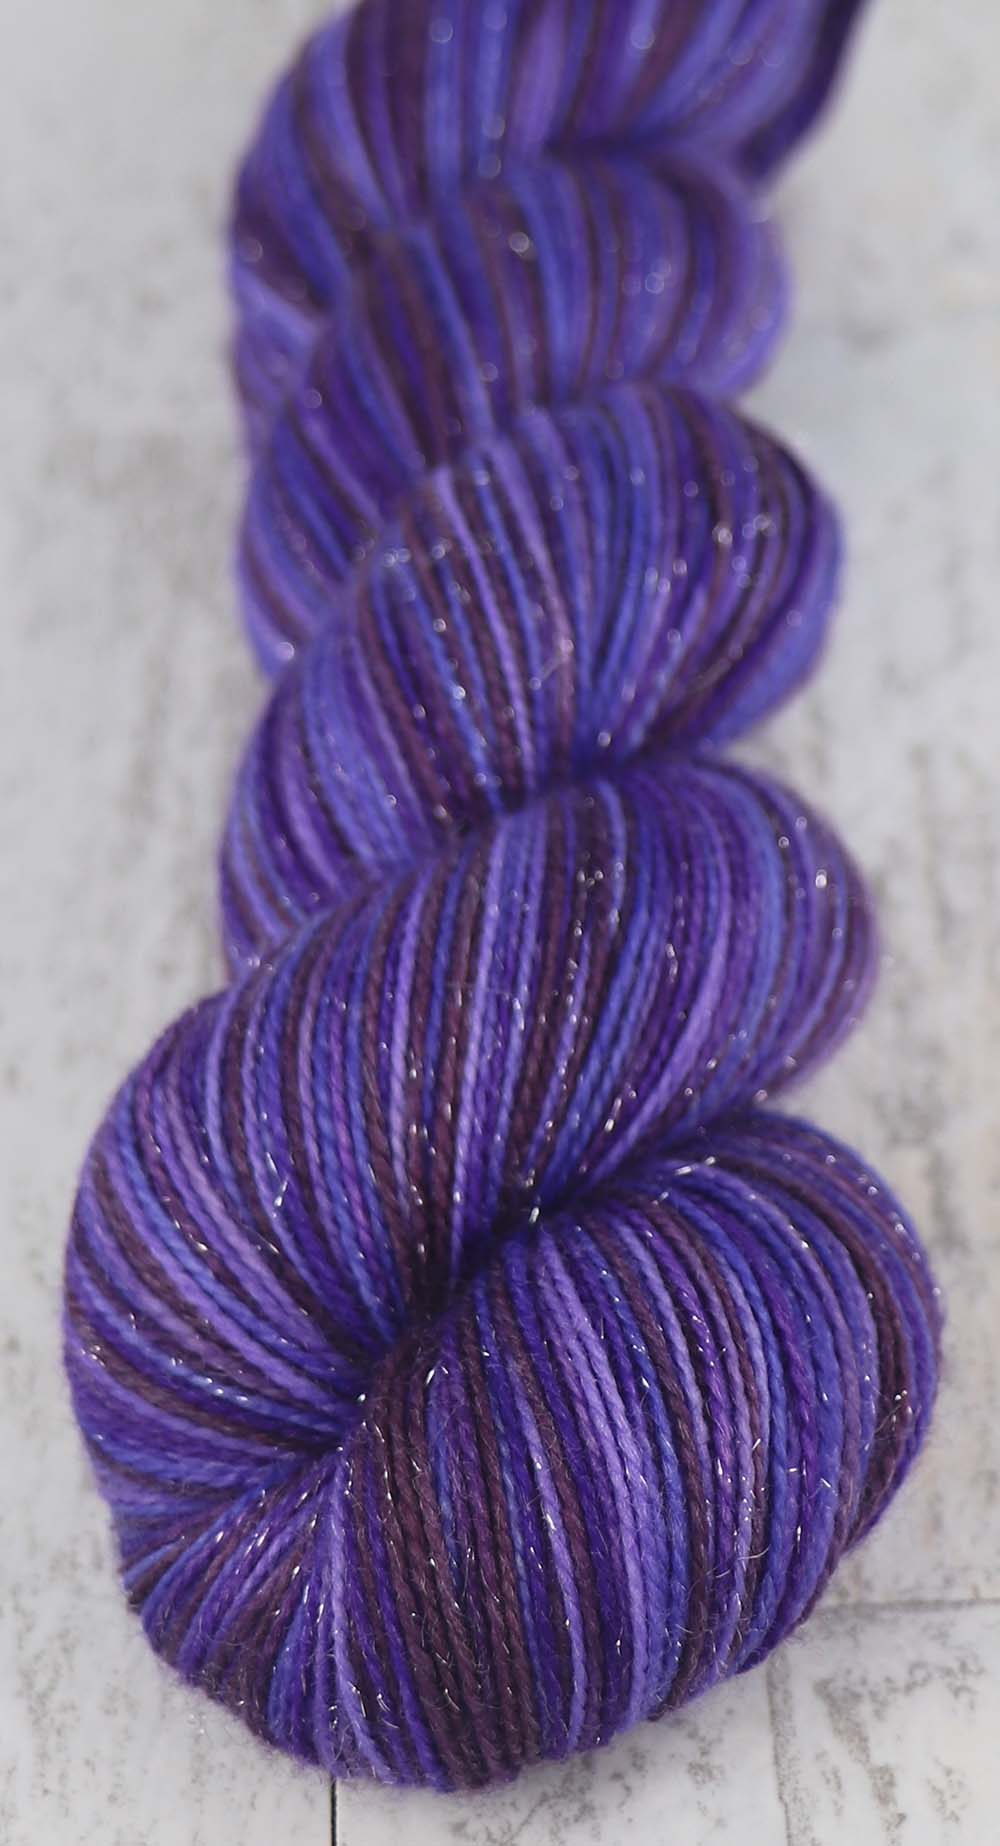 A STUDY IN PURPLES: SW Merino / Nylon / Stellina - Hand dyed Variegated Sparkle sock yarn